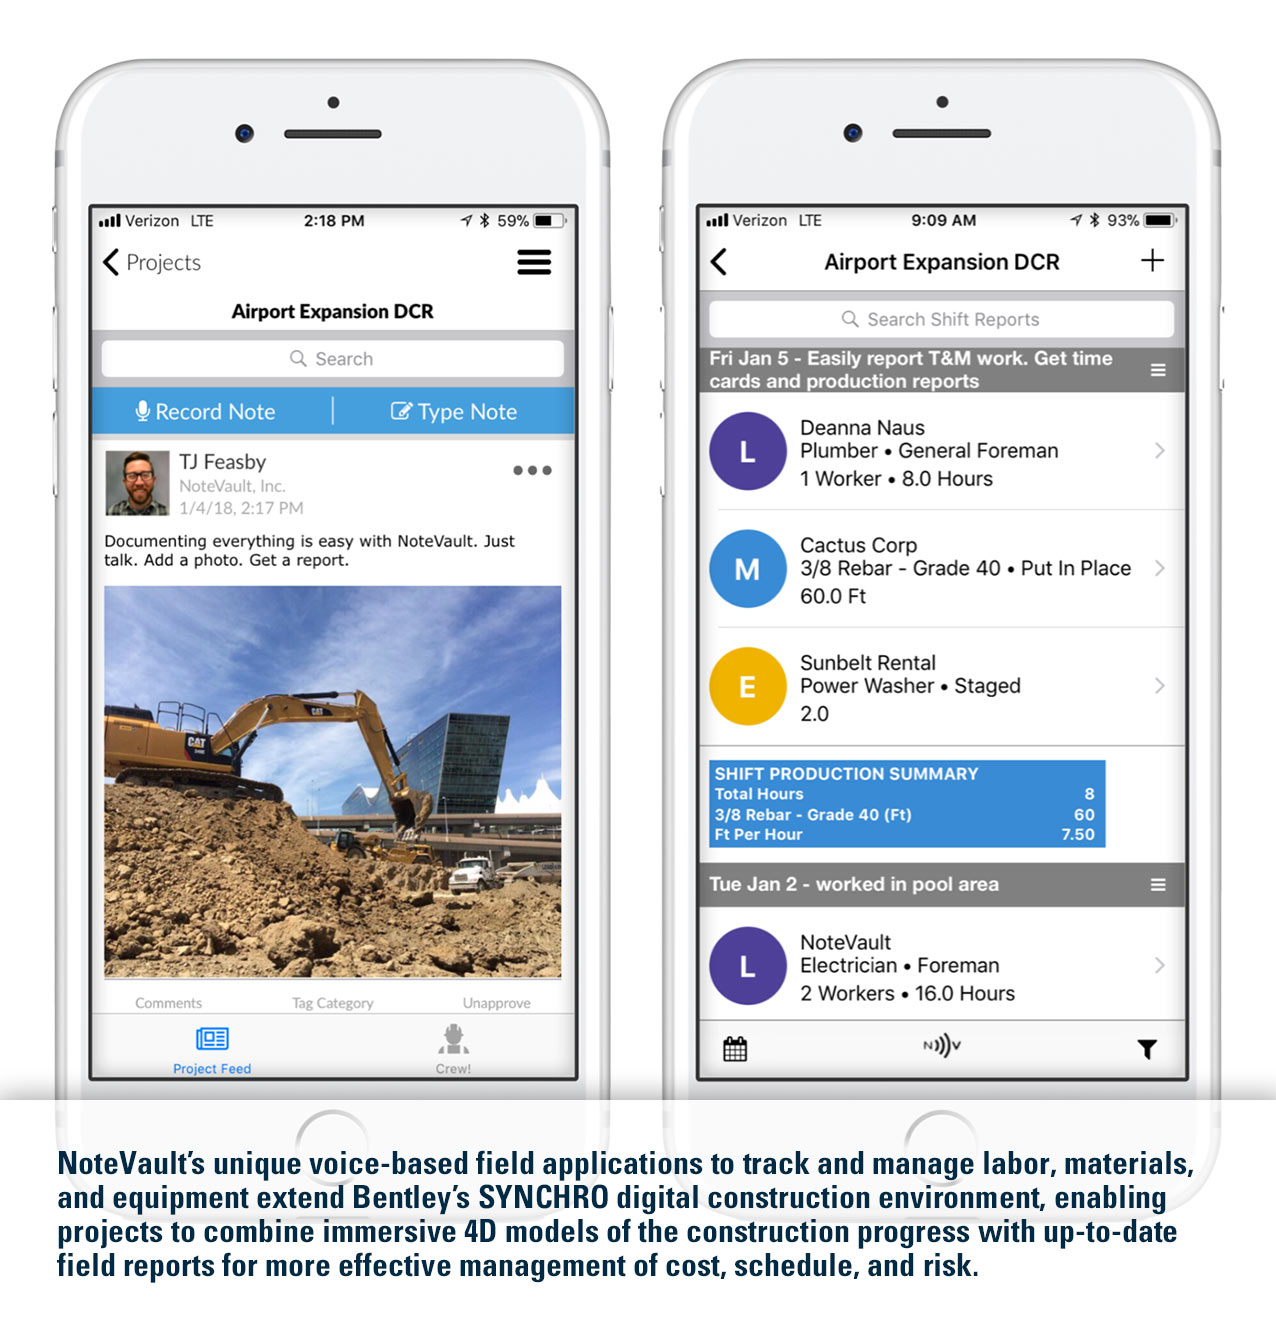 Bentley Systems acquires NoteVault, provider of voice-based field automation for construction management